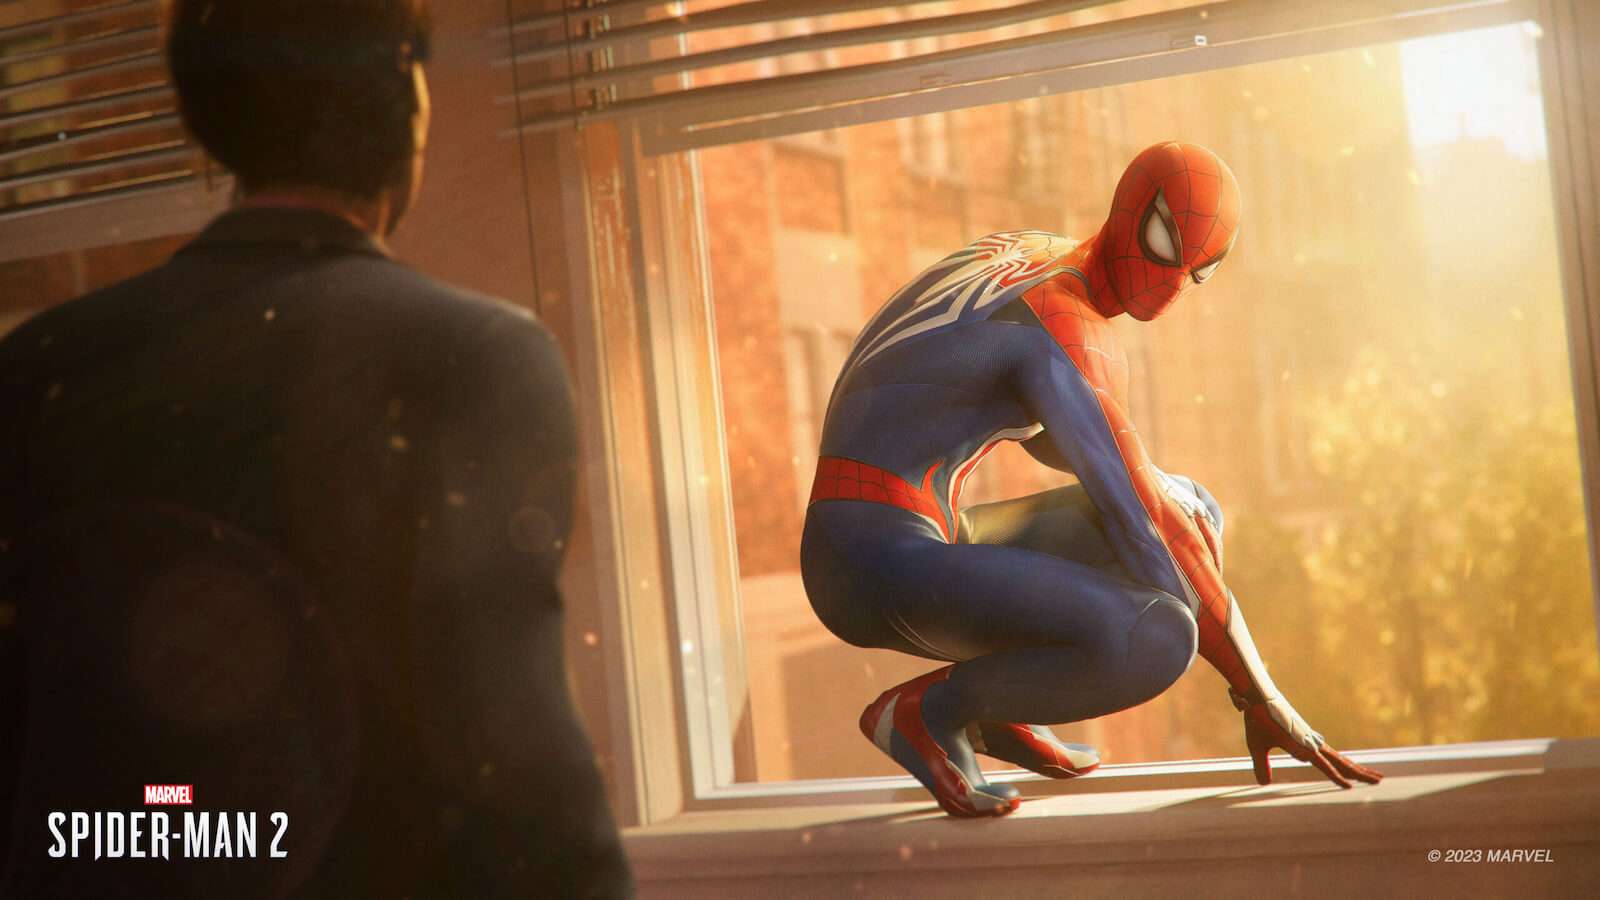 Spider-Man 2 lets players take part in interviews as the web-head